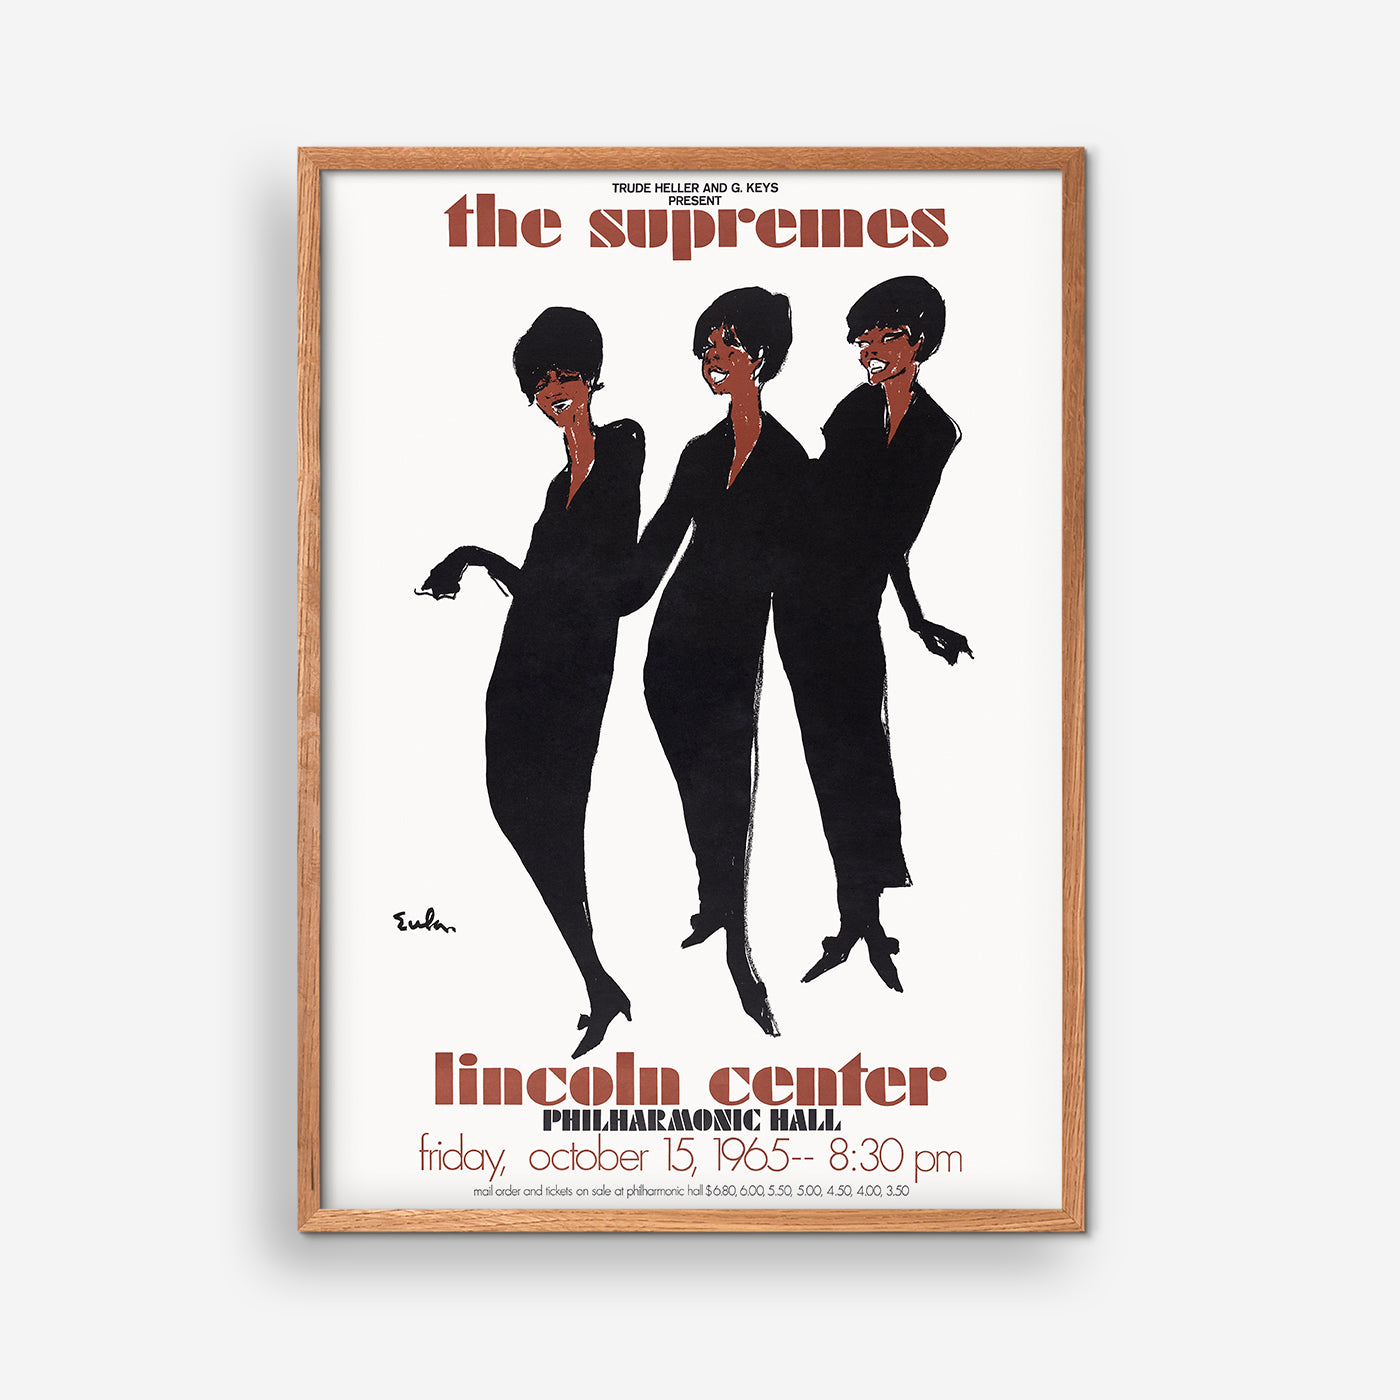 The Supremes - Lincoln Center - Philharmonic Hall